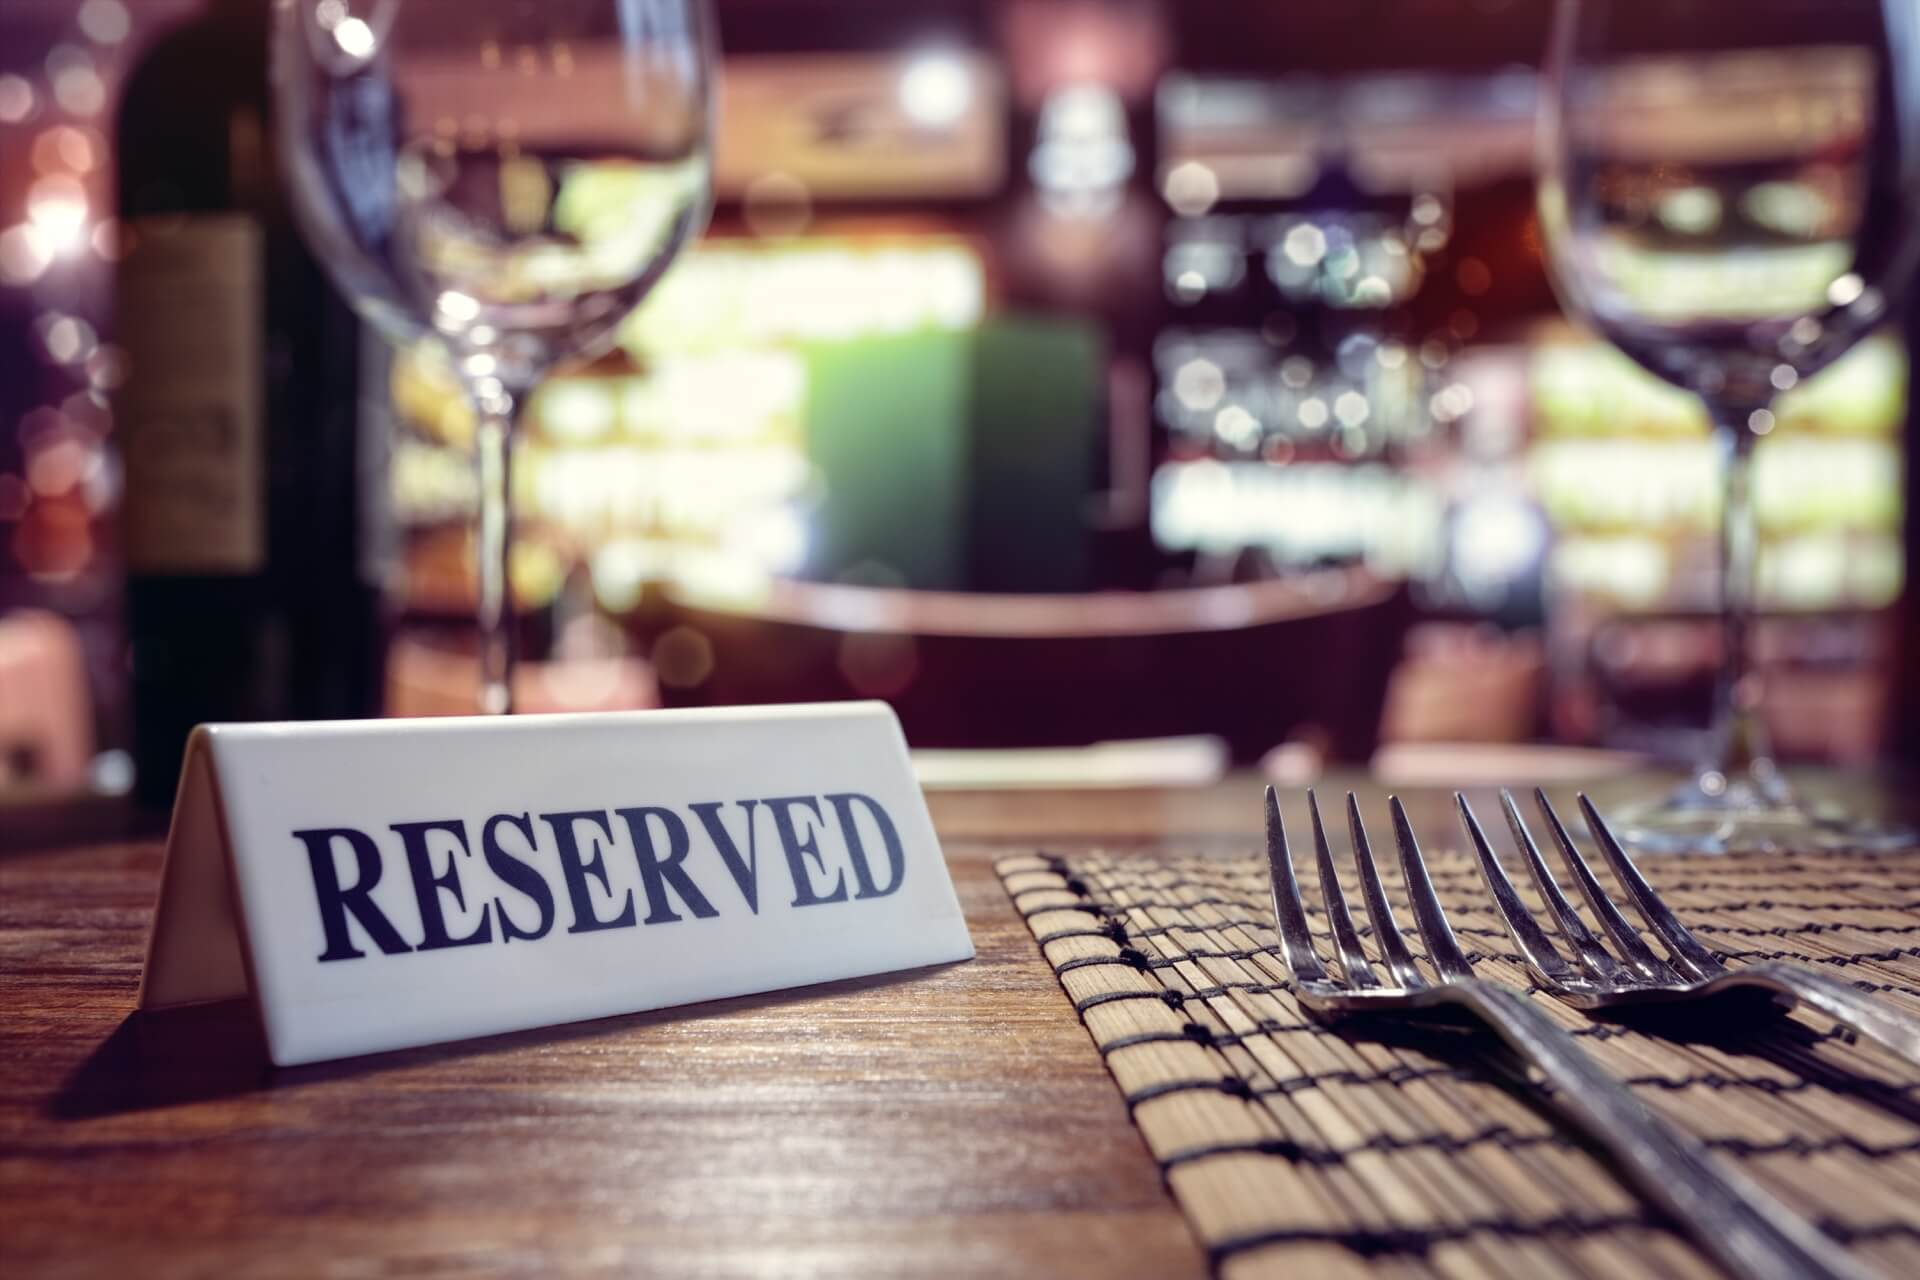 Photo with reserved sign on a table